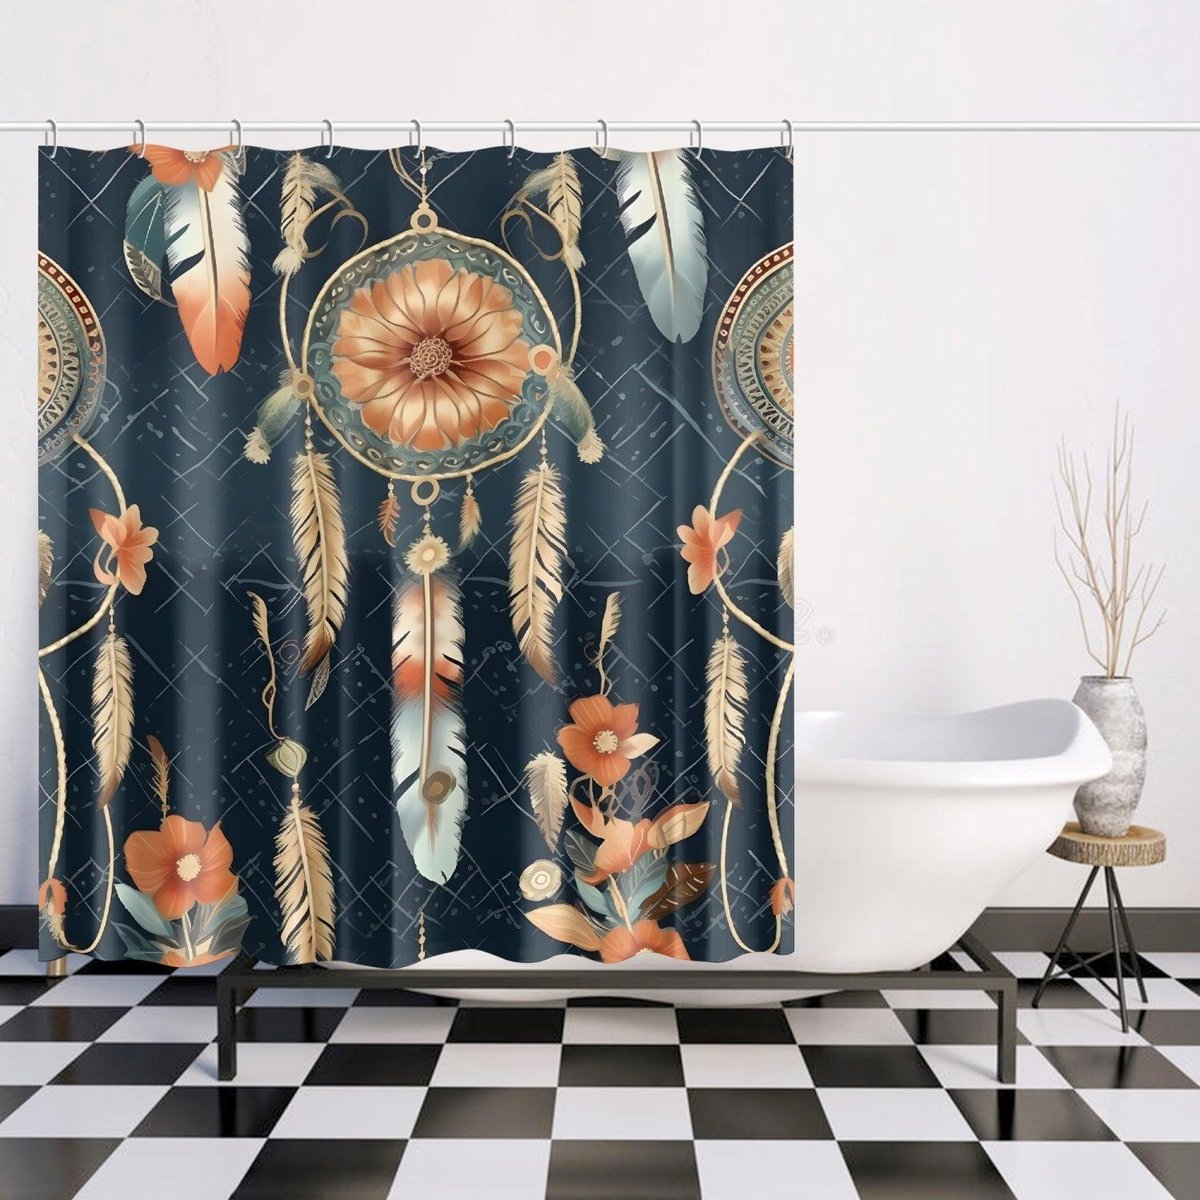 Bring beauty to your bath with Dreamcatcher Shower Curtain 🌹🚿 Discover elegance—link in bio to shop!#BathroomDecor #BathroomMakeover #ShowerCurtains #BathTime #BathroomStyle #BathroomDetails #LuxuryBathroom #BathroomInspo #ShowerDecor #WaterproofDecor
 showercurtainco.com/products/171-q…